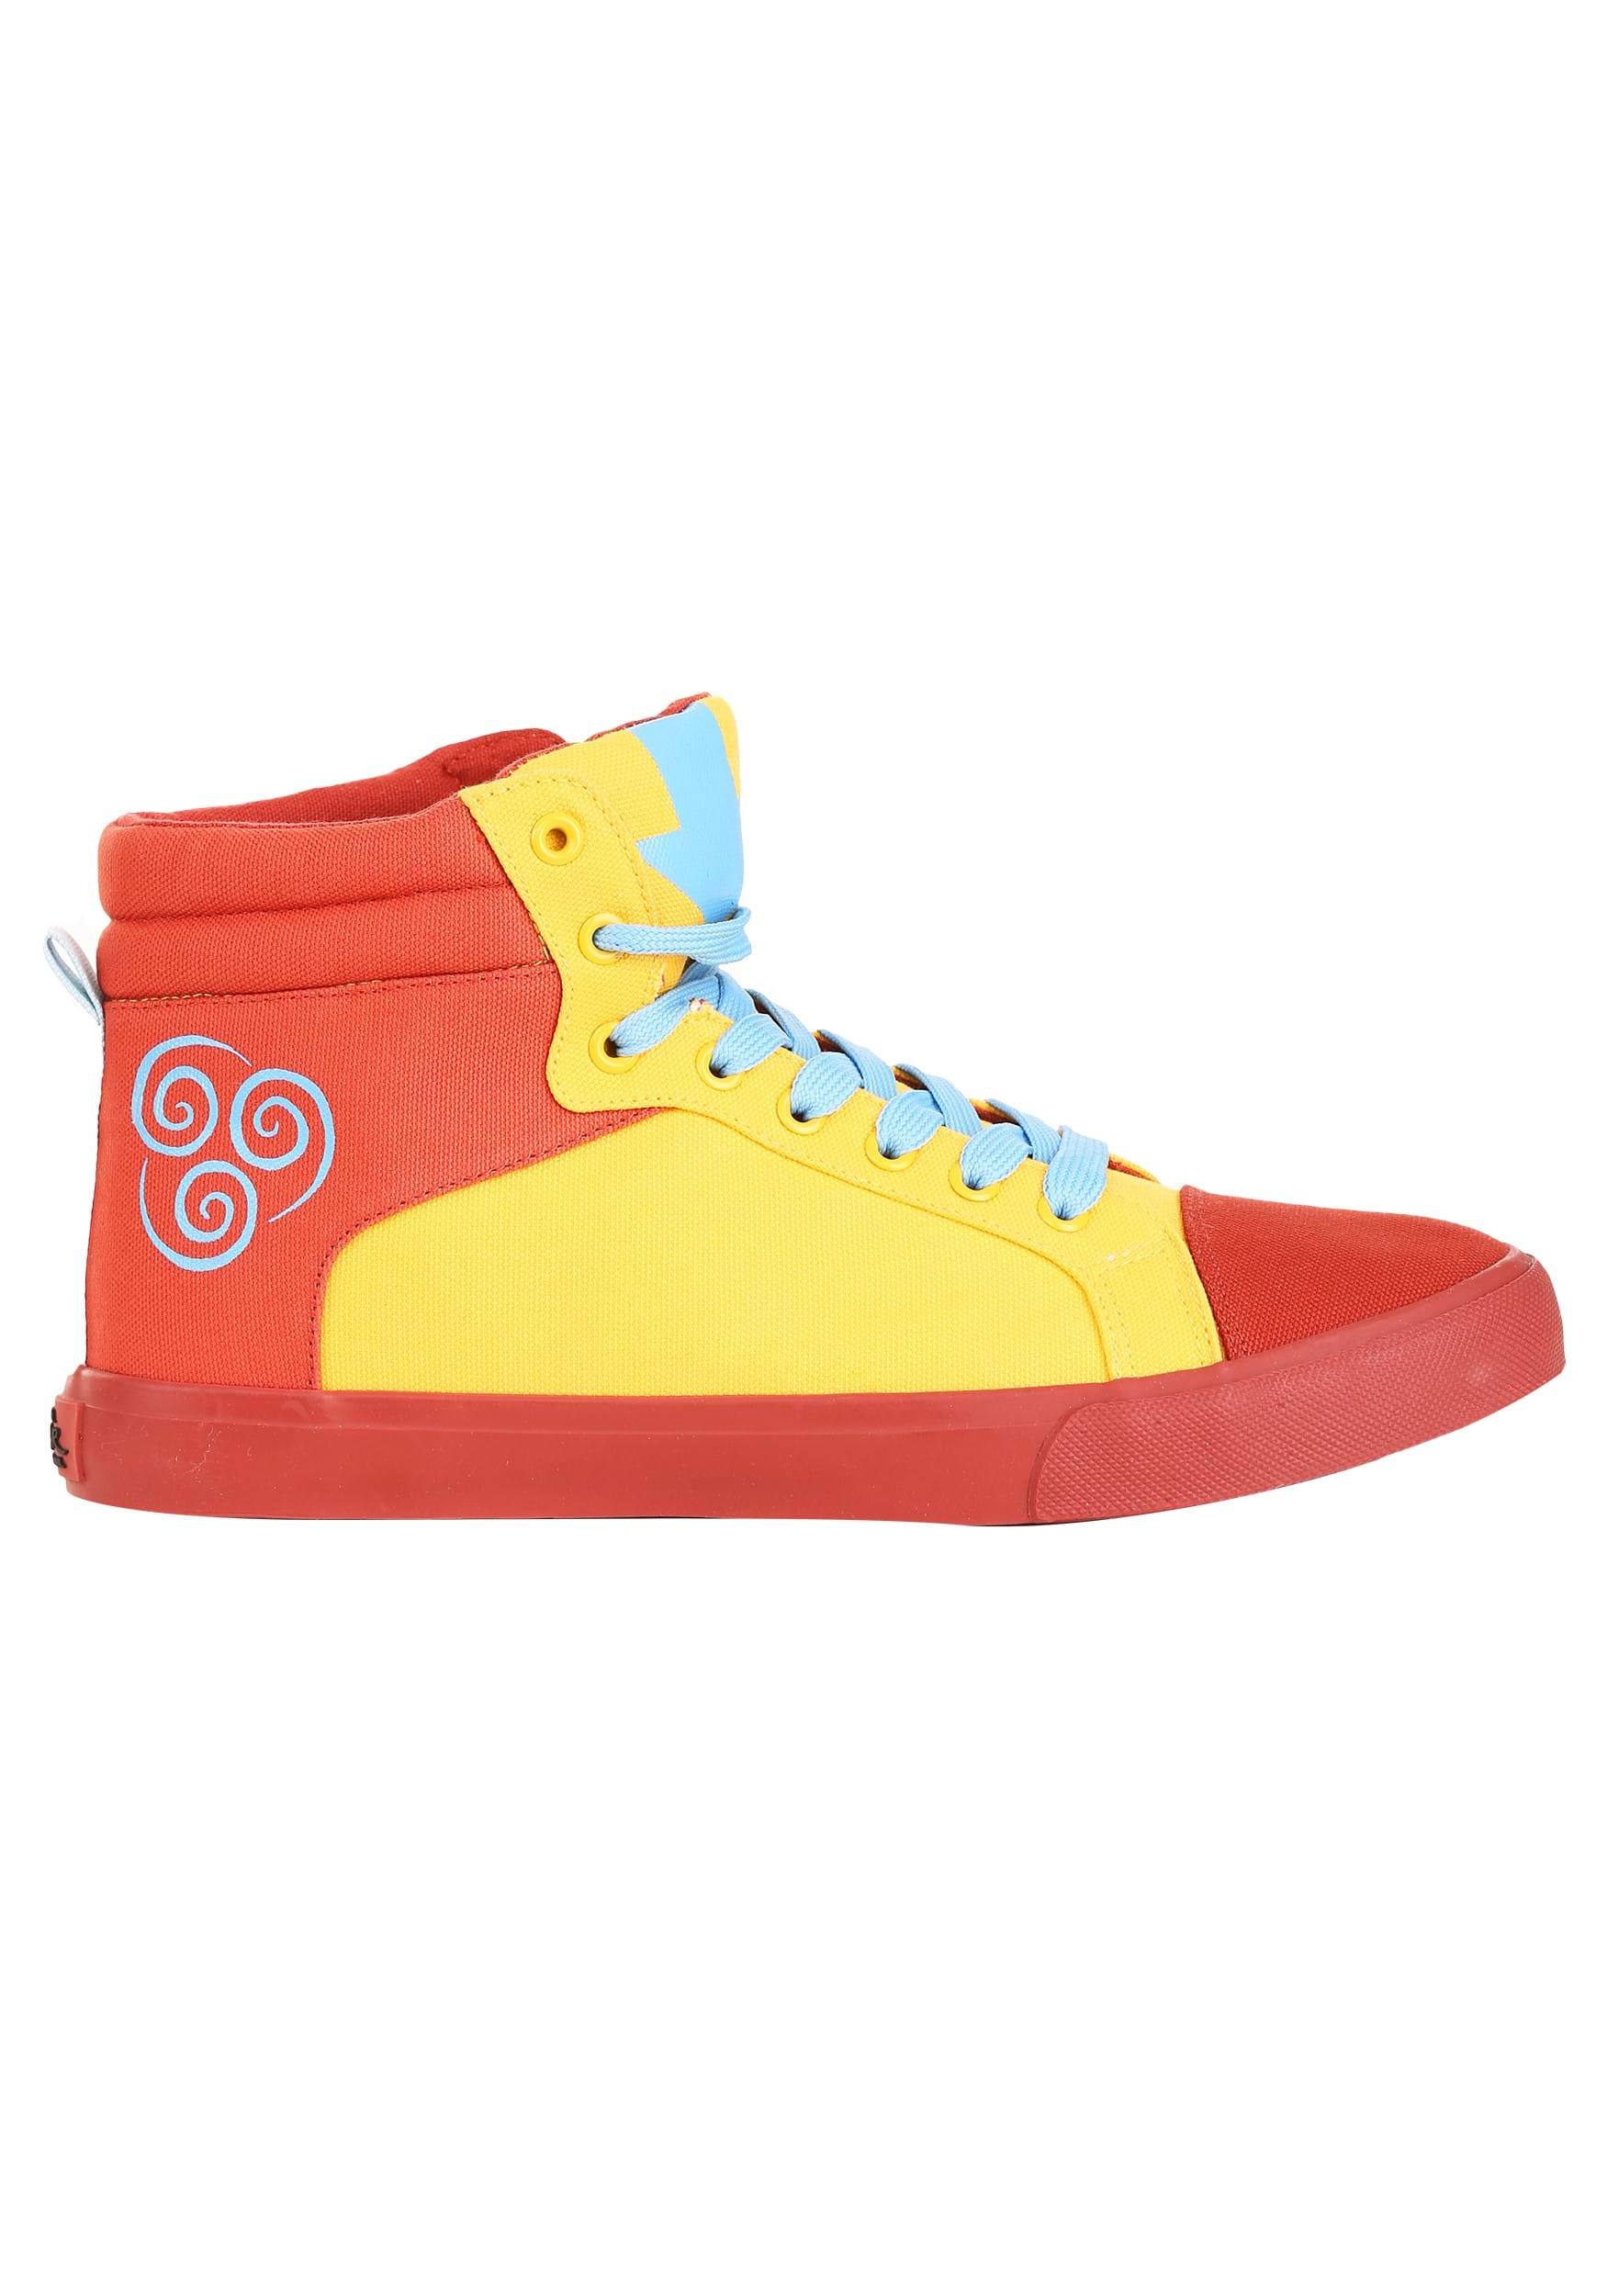 Unisex Avatar: the Last Airbender Shoes